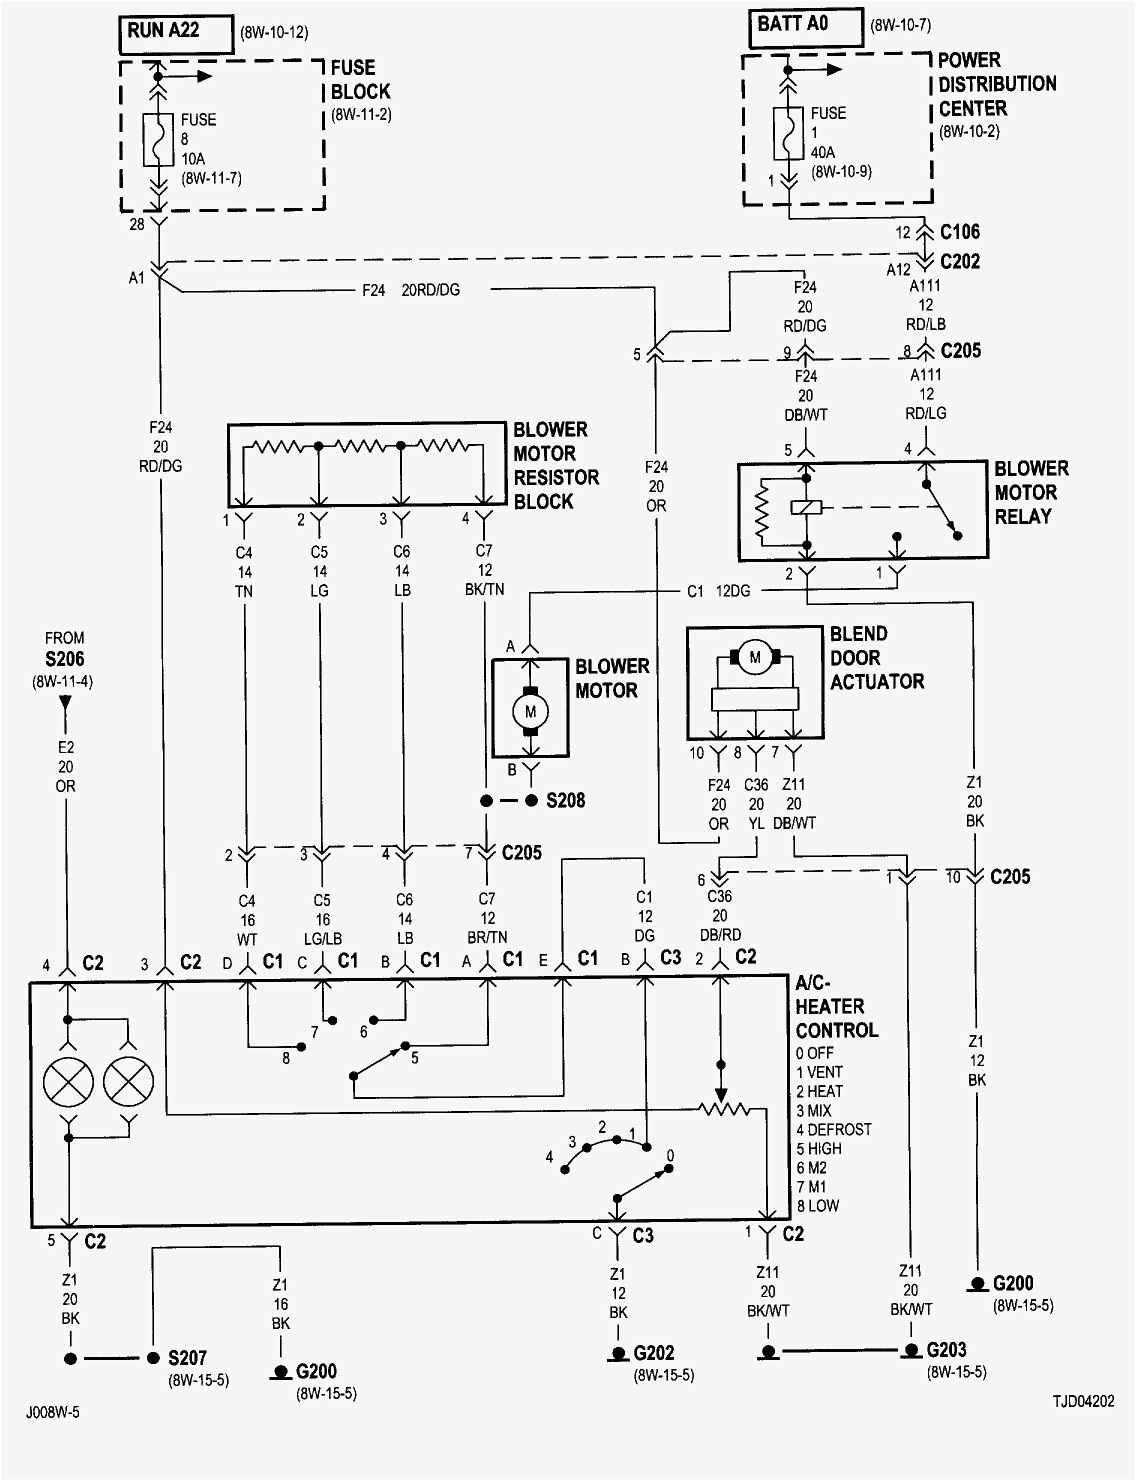 2010 jeep wrangler unlimited engine diagram wiring diagram operations2010 jeep wrangler unlimited engine diagram wiring diagram